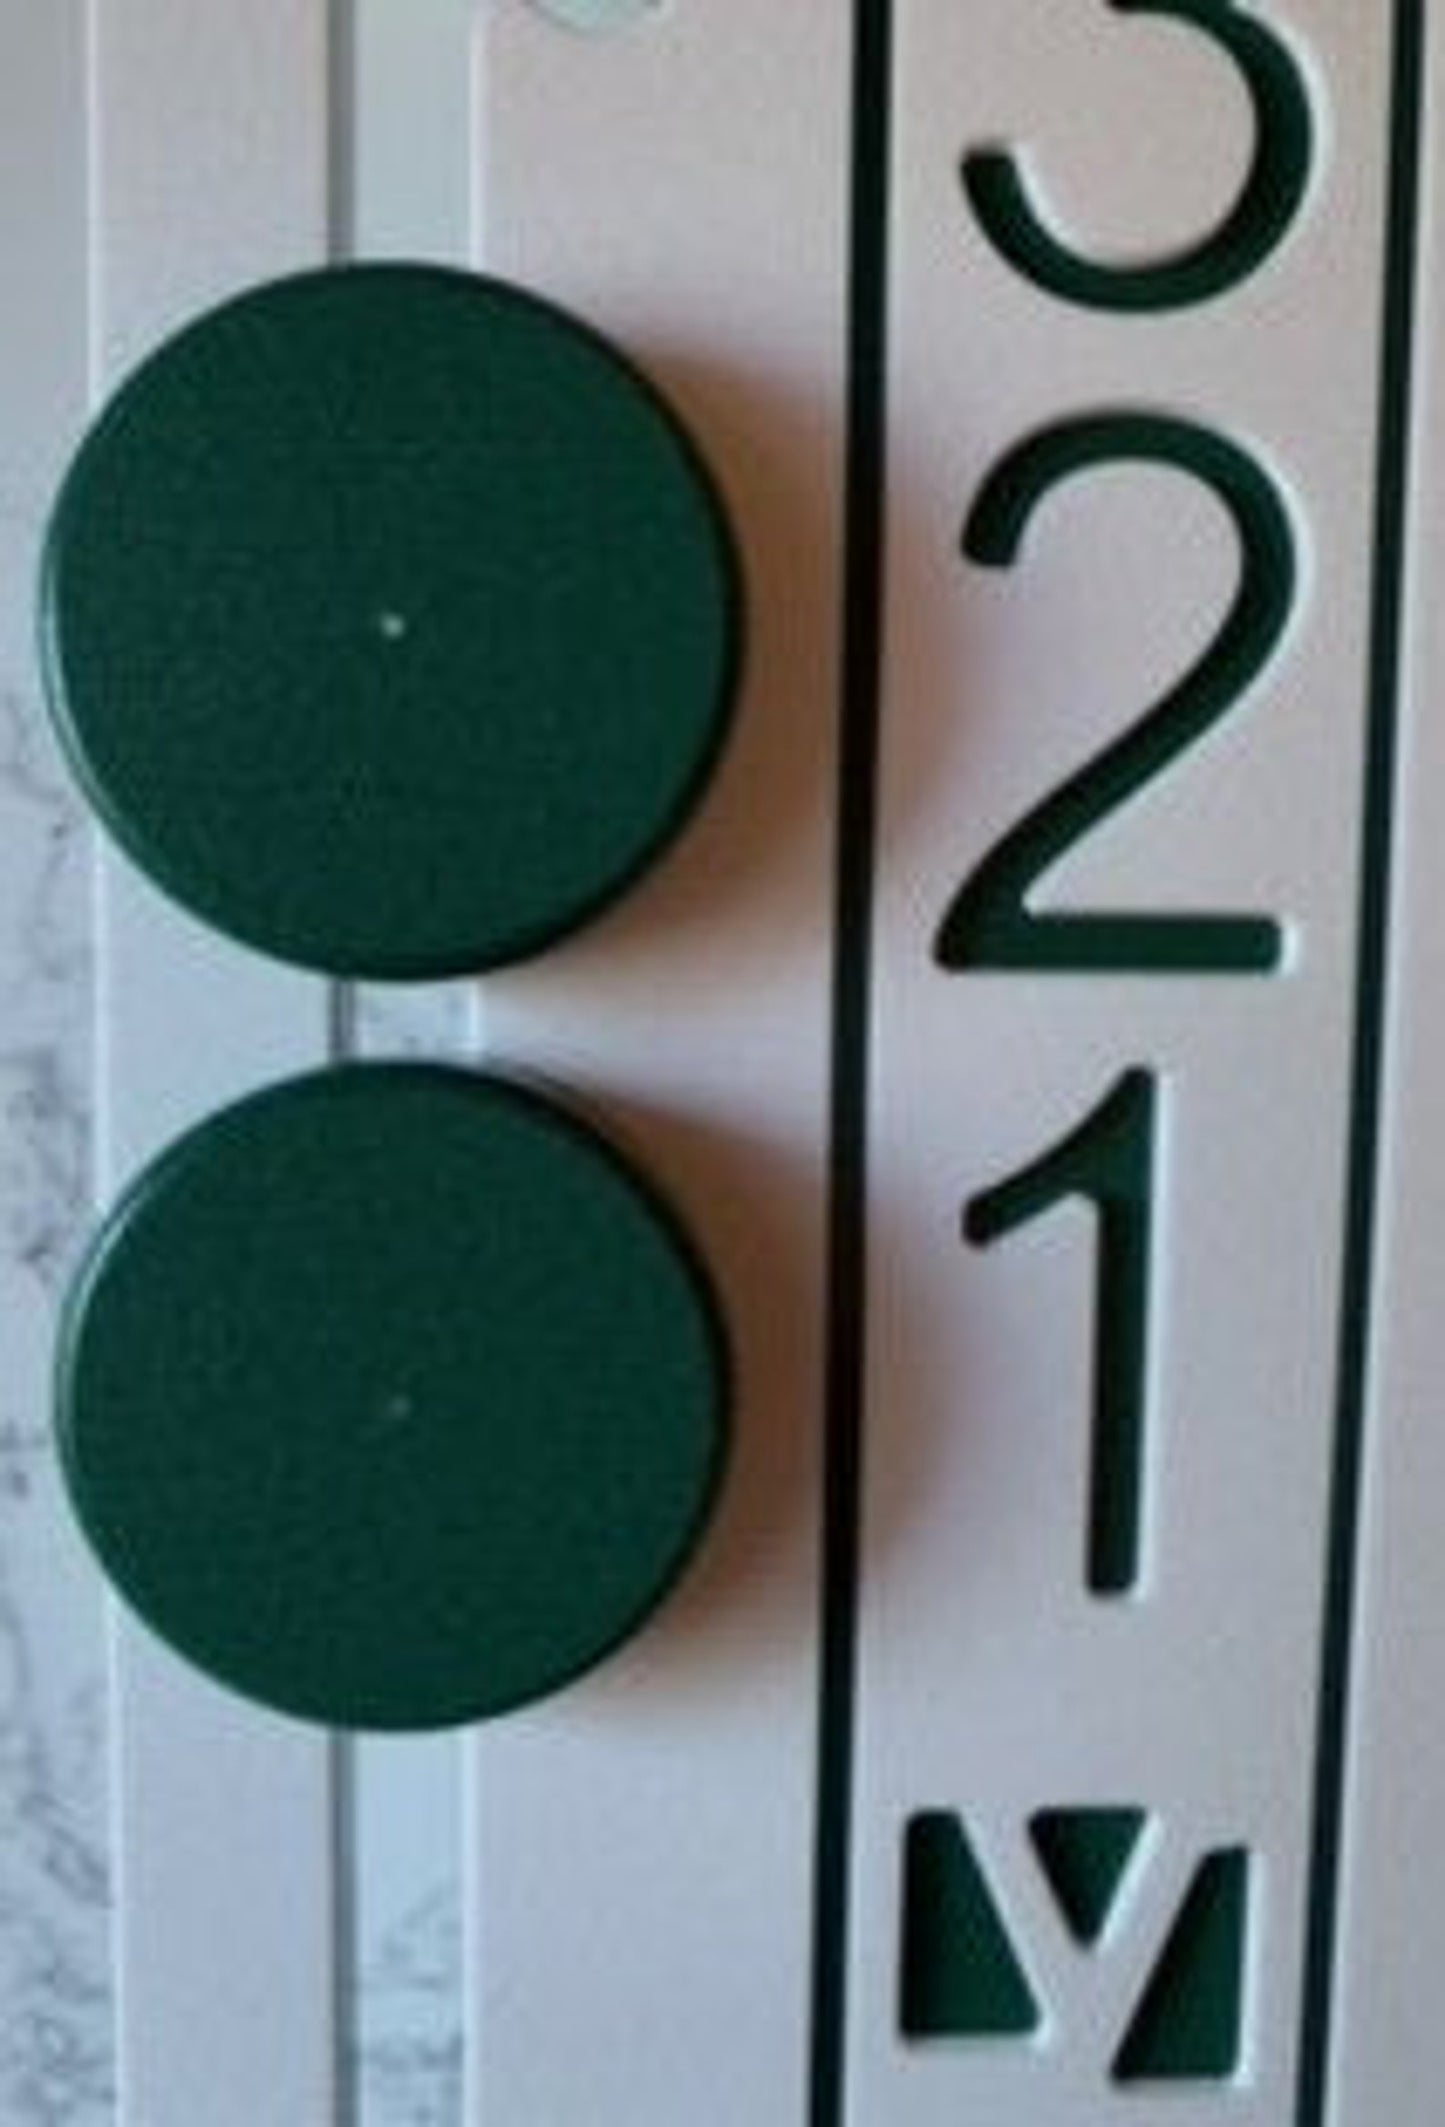 Pair of replacement indicators for Bocce Scoreboard (multiple colors available)